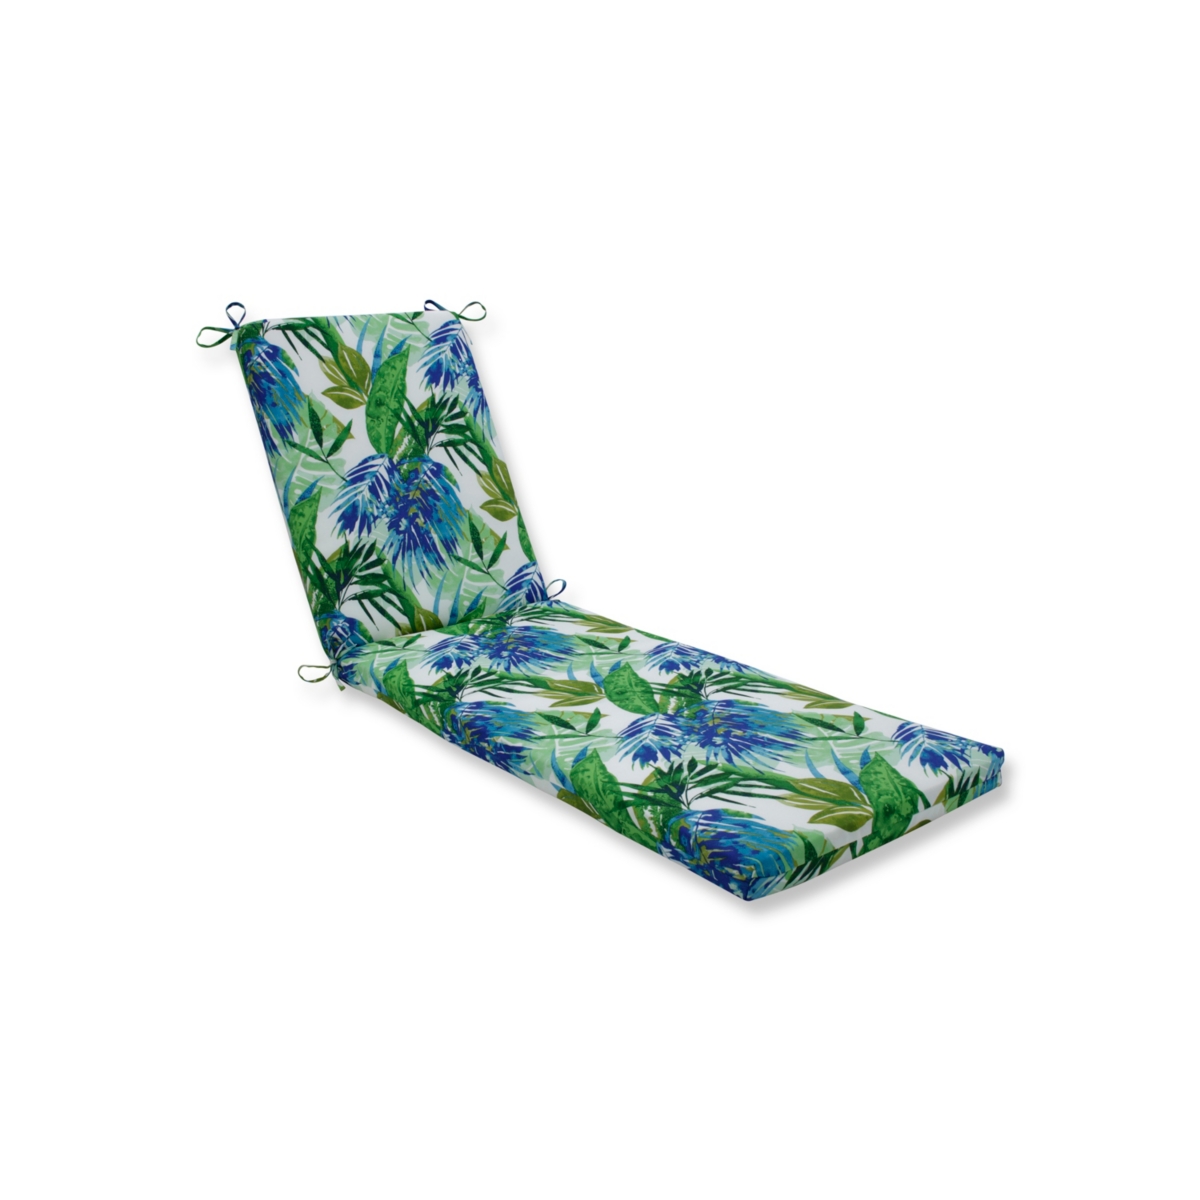 Printed Outdoor Chaise Lounge Cushion - Red Stripe